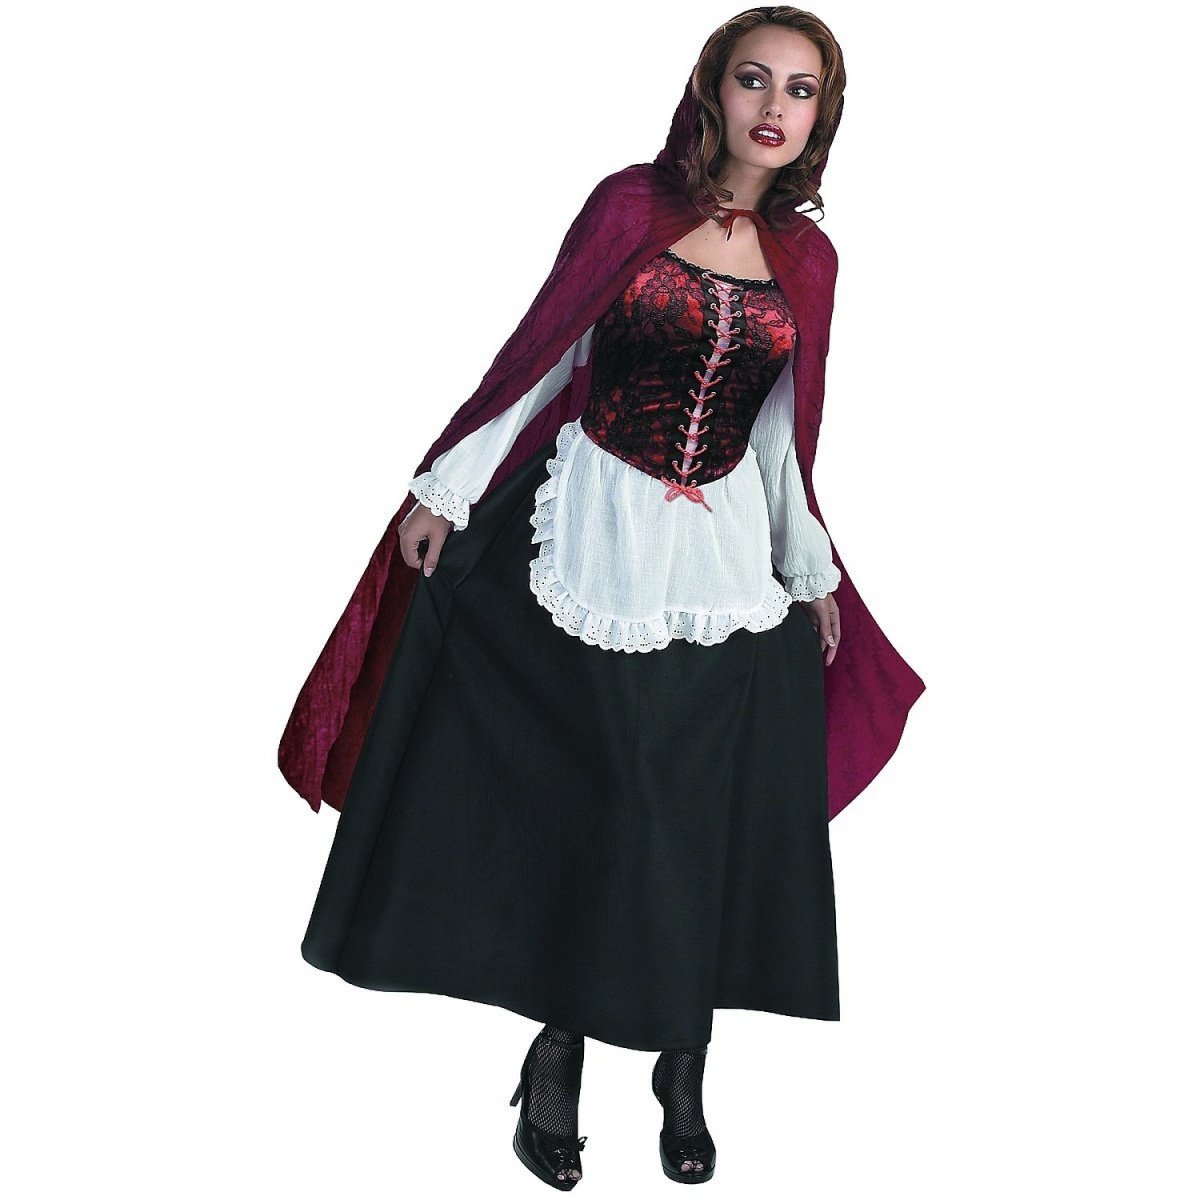 Little Red Riding Hood costume                                                                                                                                                                                                                            